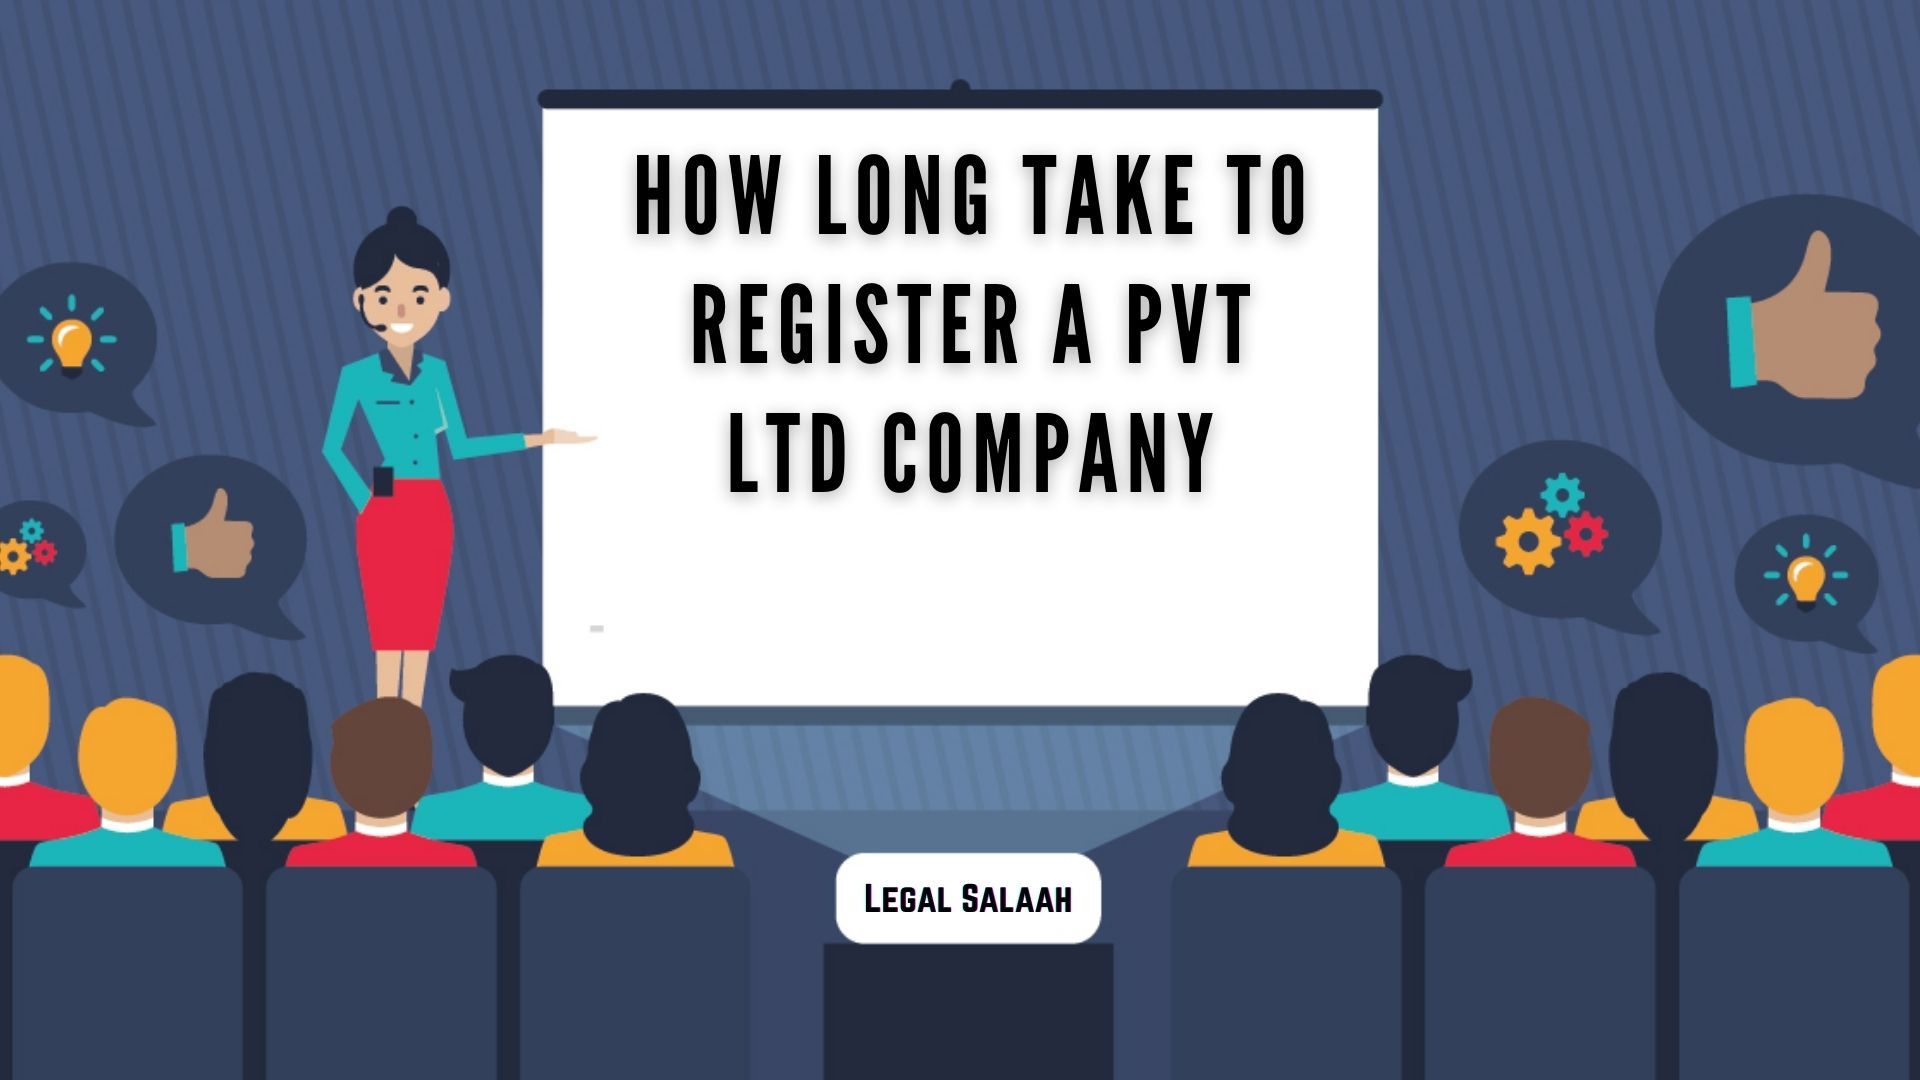 How Long It Will Take To Register A Pvt Ltd Company | Blogs